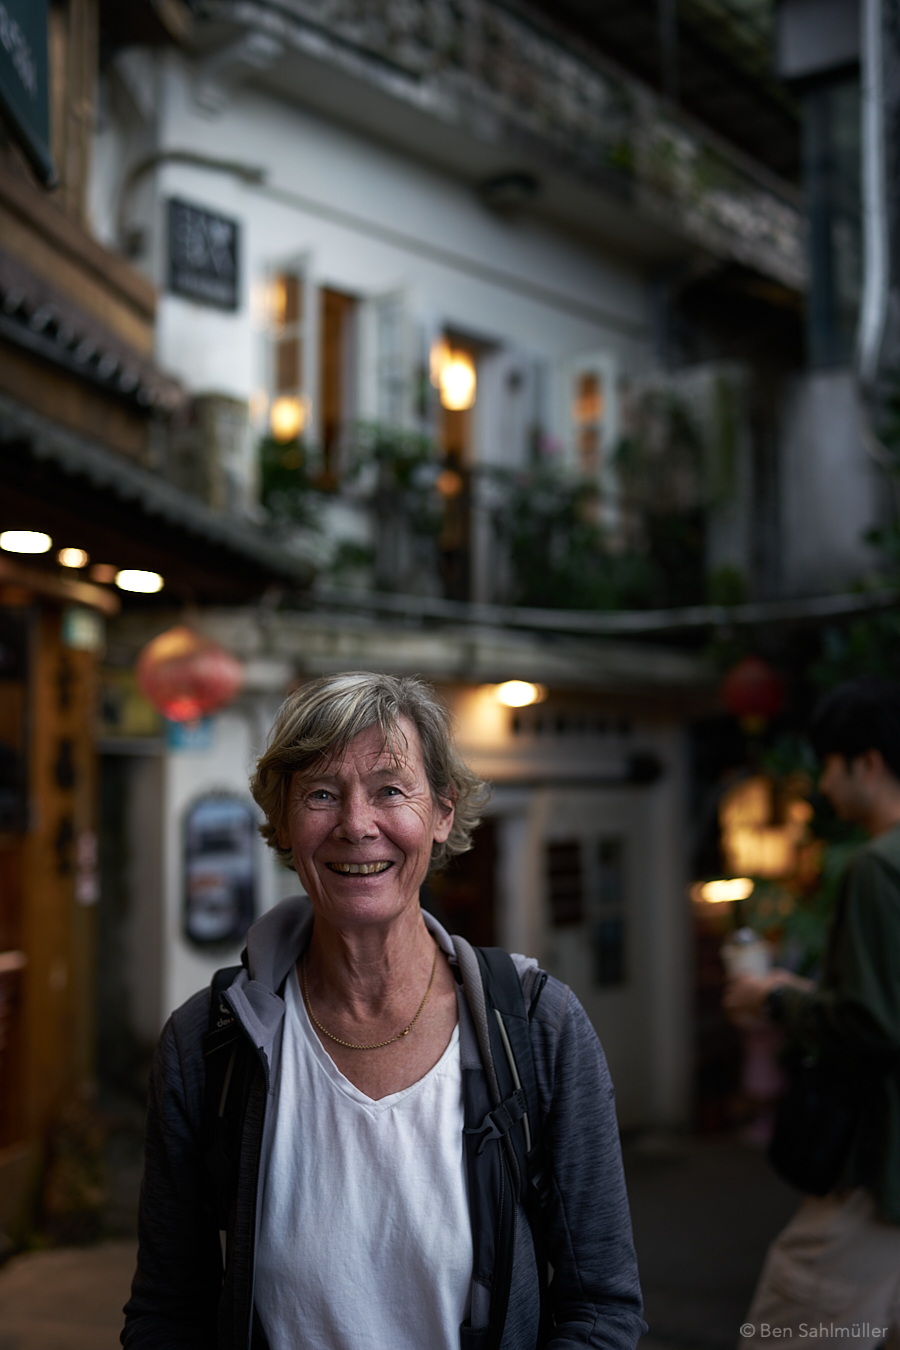 A portrait of a woman, wearing a white shirt and a grey jacket and smiling into the camera. The image is taken spontaneously in the streets of Jiufen. Some of the houses can be seen warm and blurred in the background.